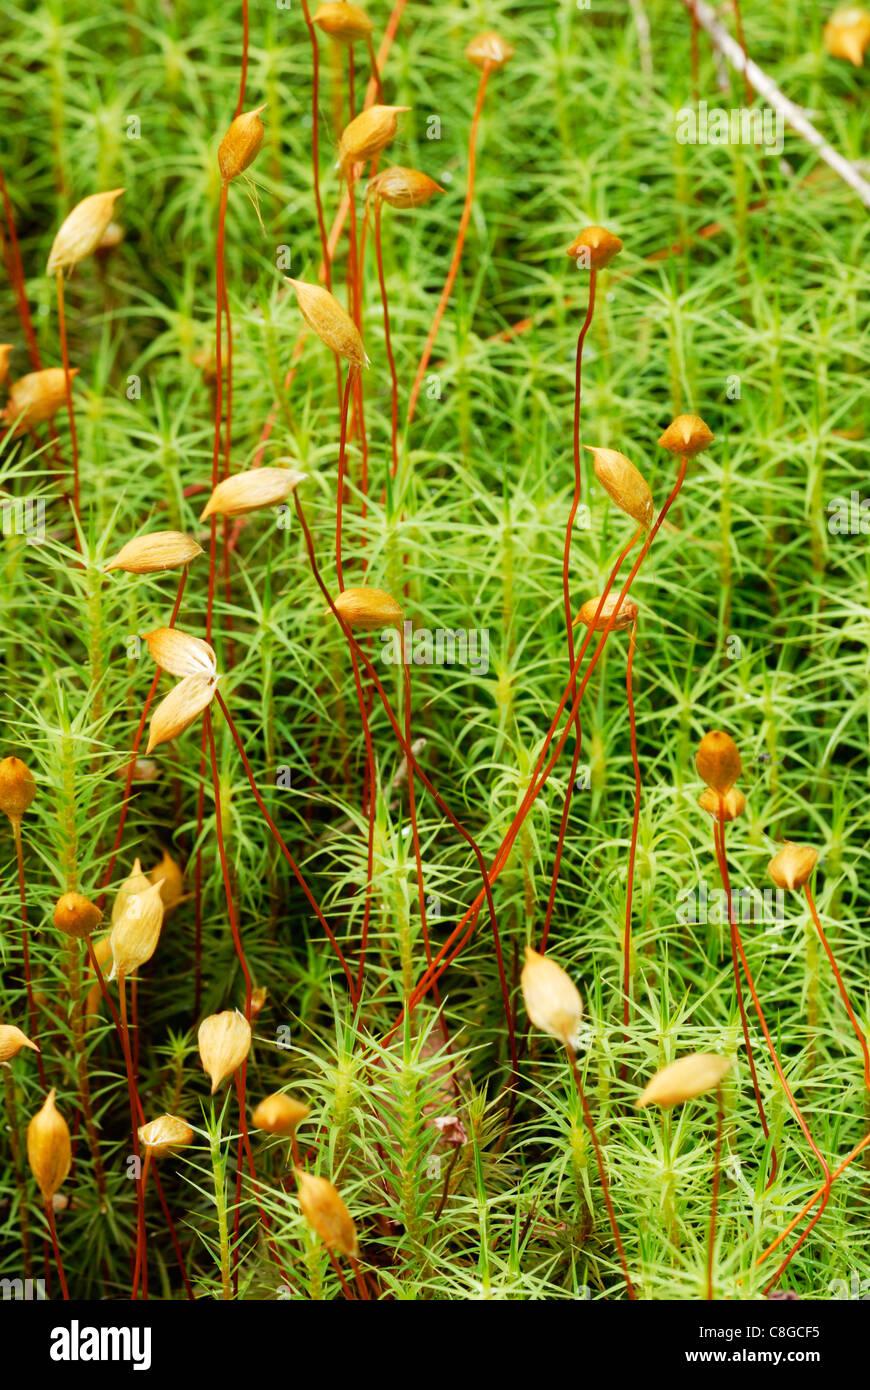 polytrichum-commune-moss-with-fruiting-bodies-wales-uk-C8GCF5.jpg